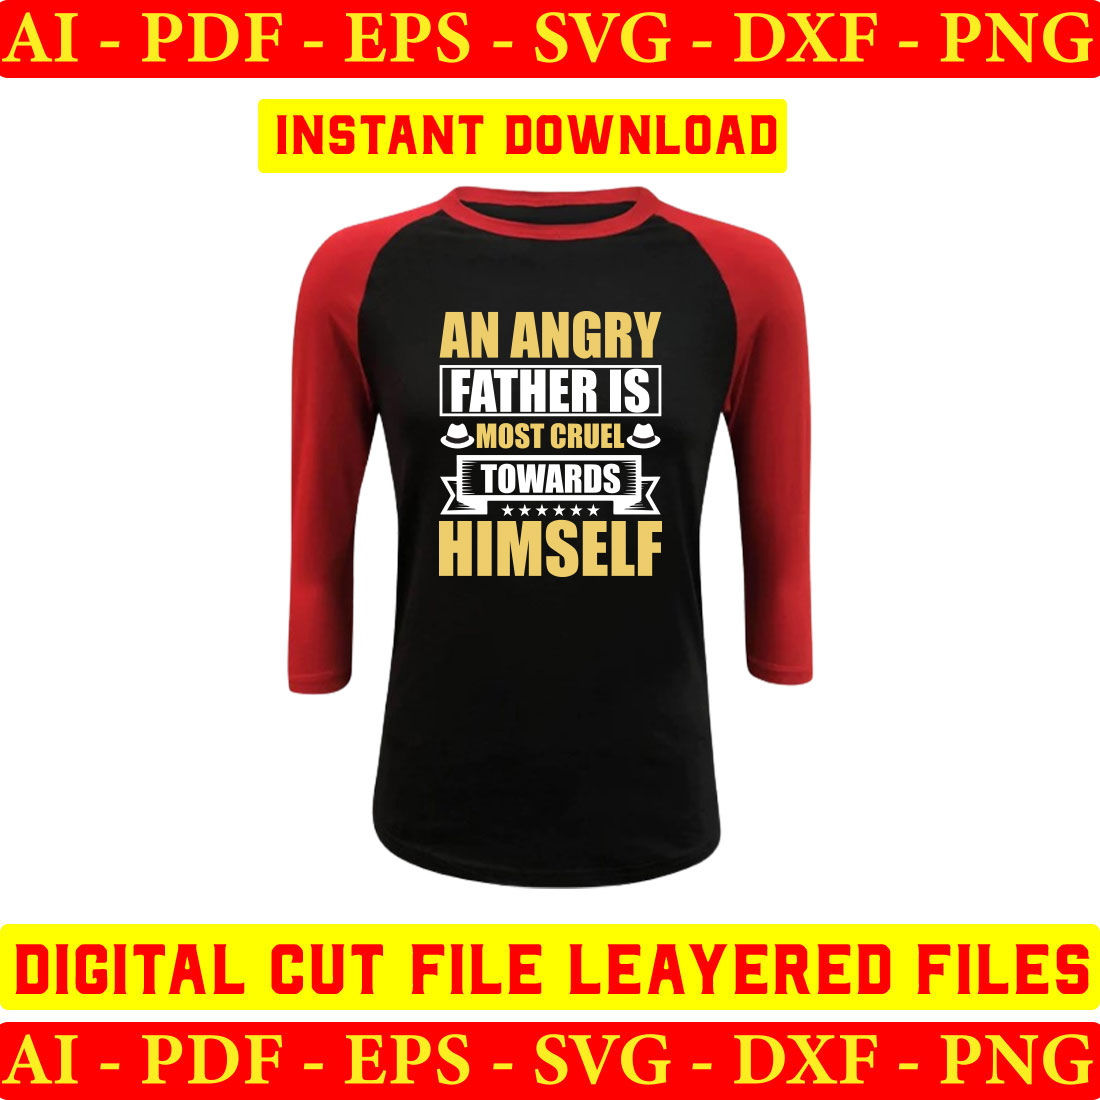 Black and red shirt with an image of an angry father.